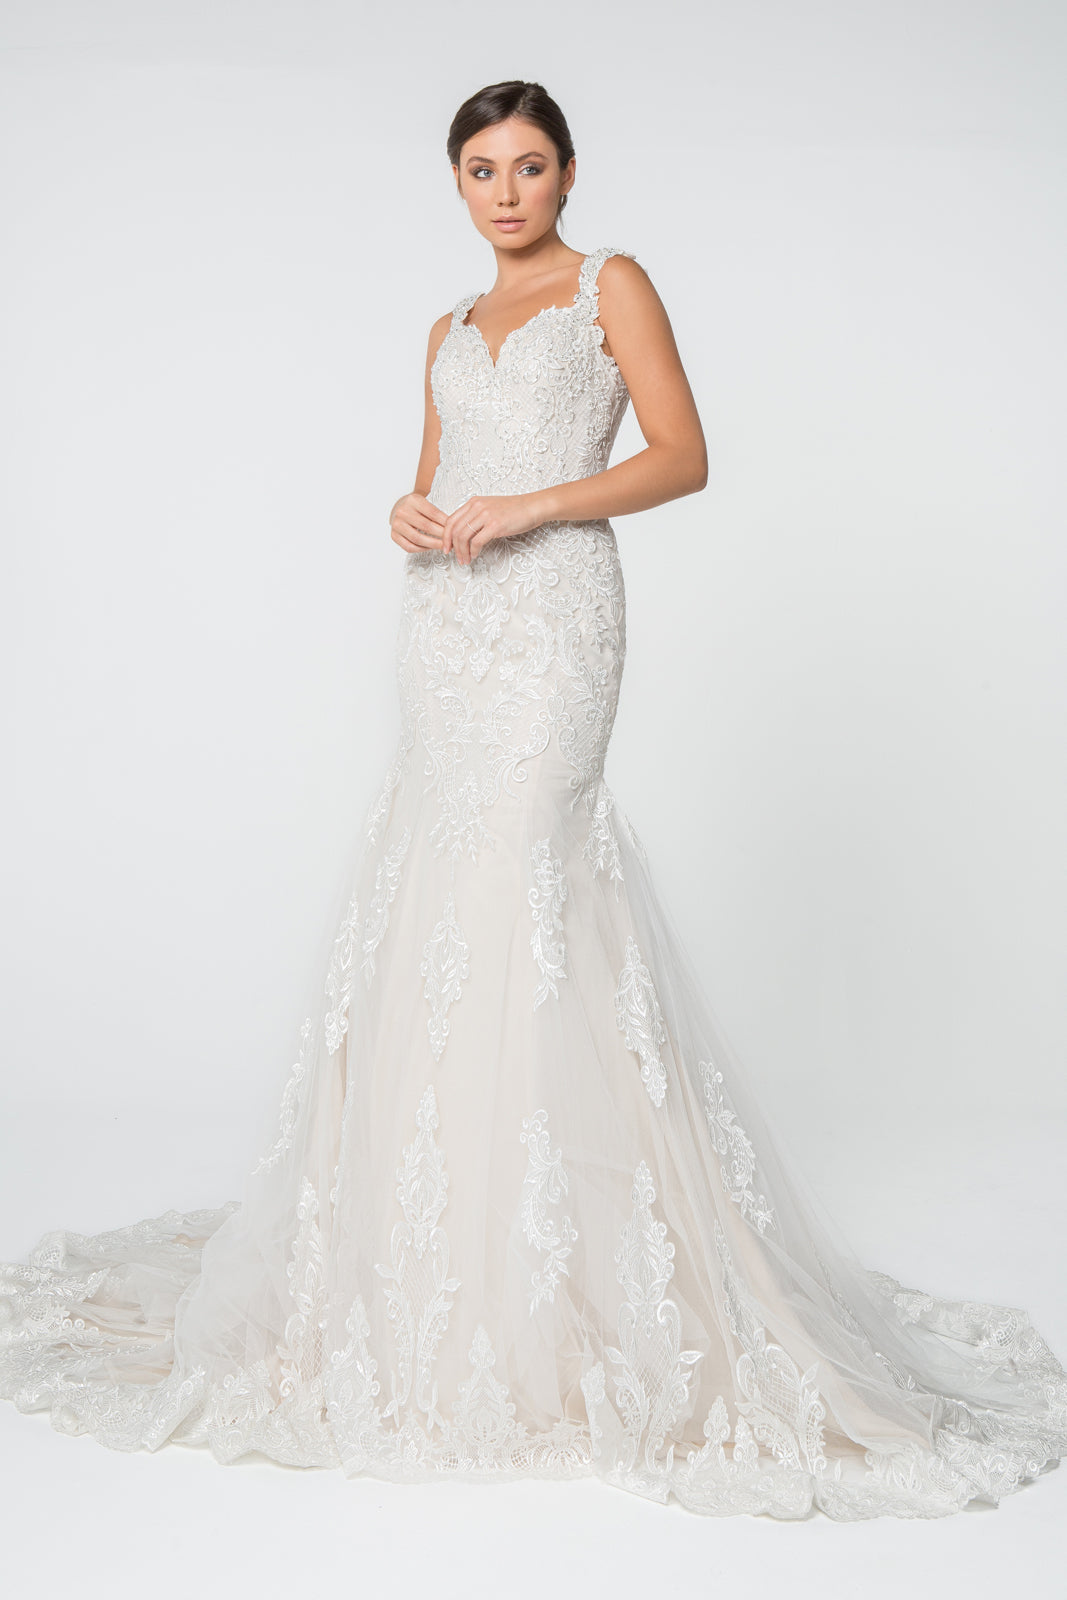 Lace and Jewel Embellished Mermaid Wedding Gown Tail GLGL2819 –